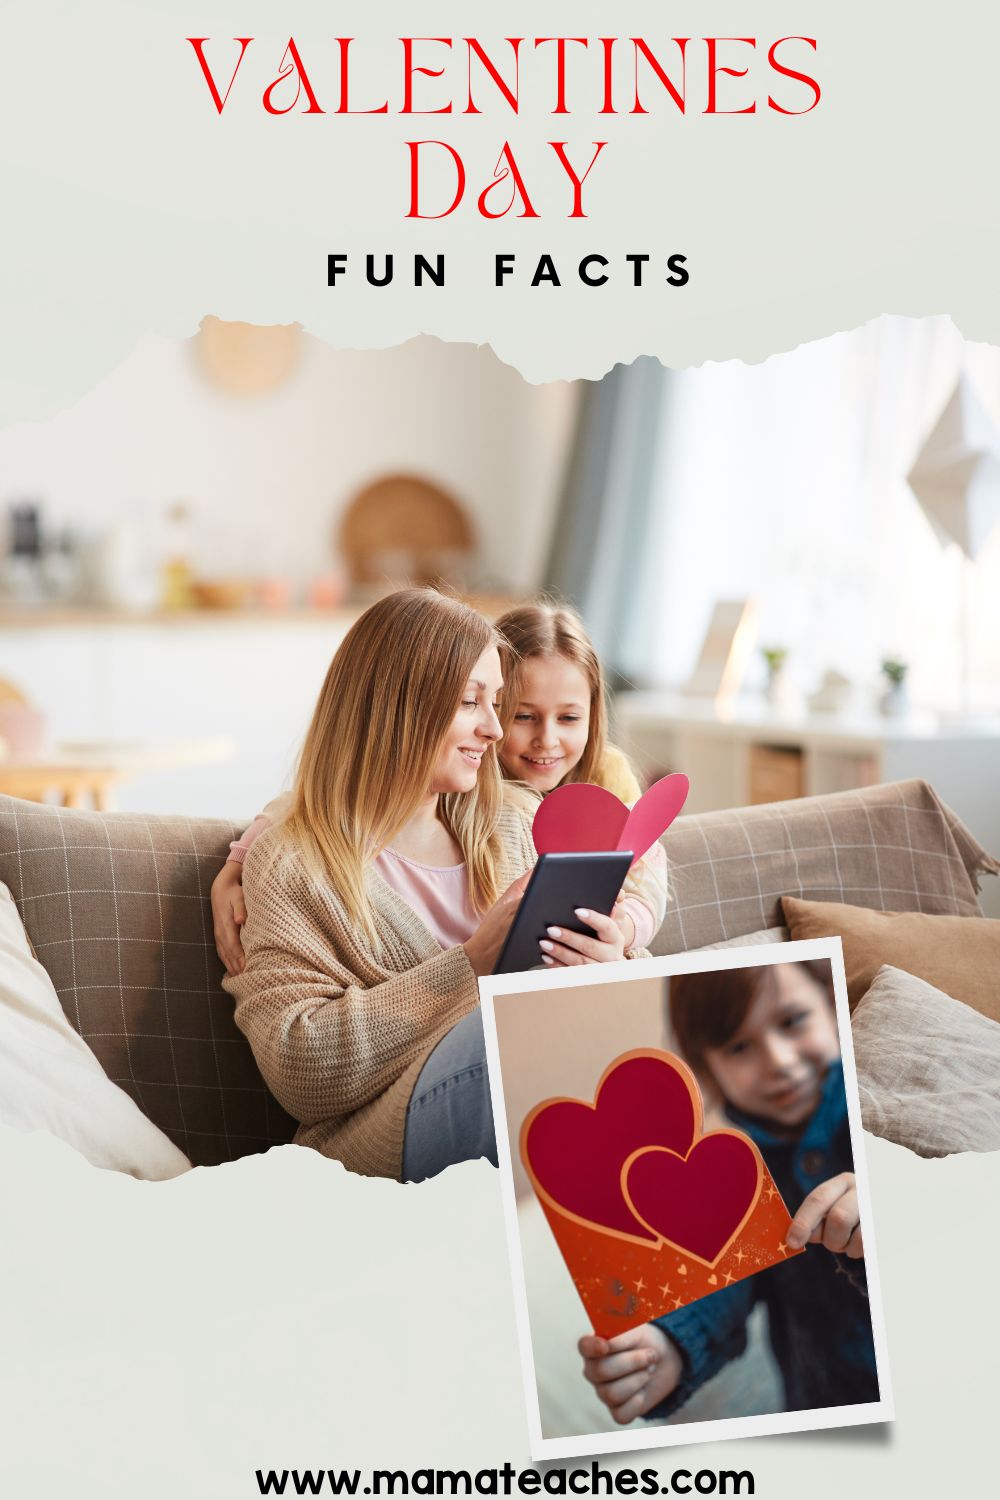 Fun Facts About Valentines Day